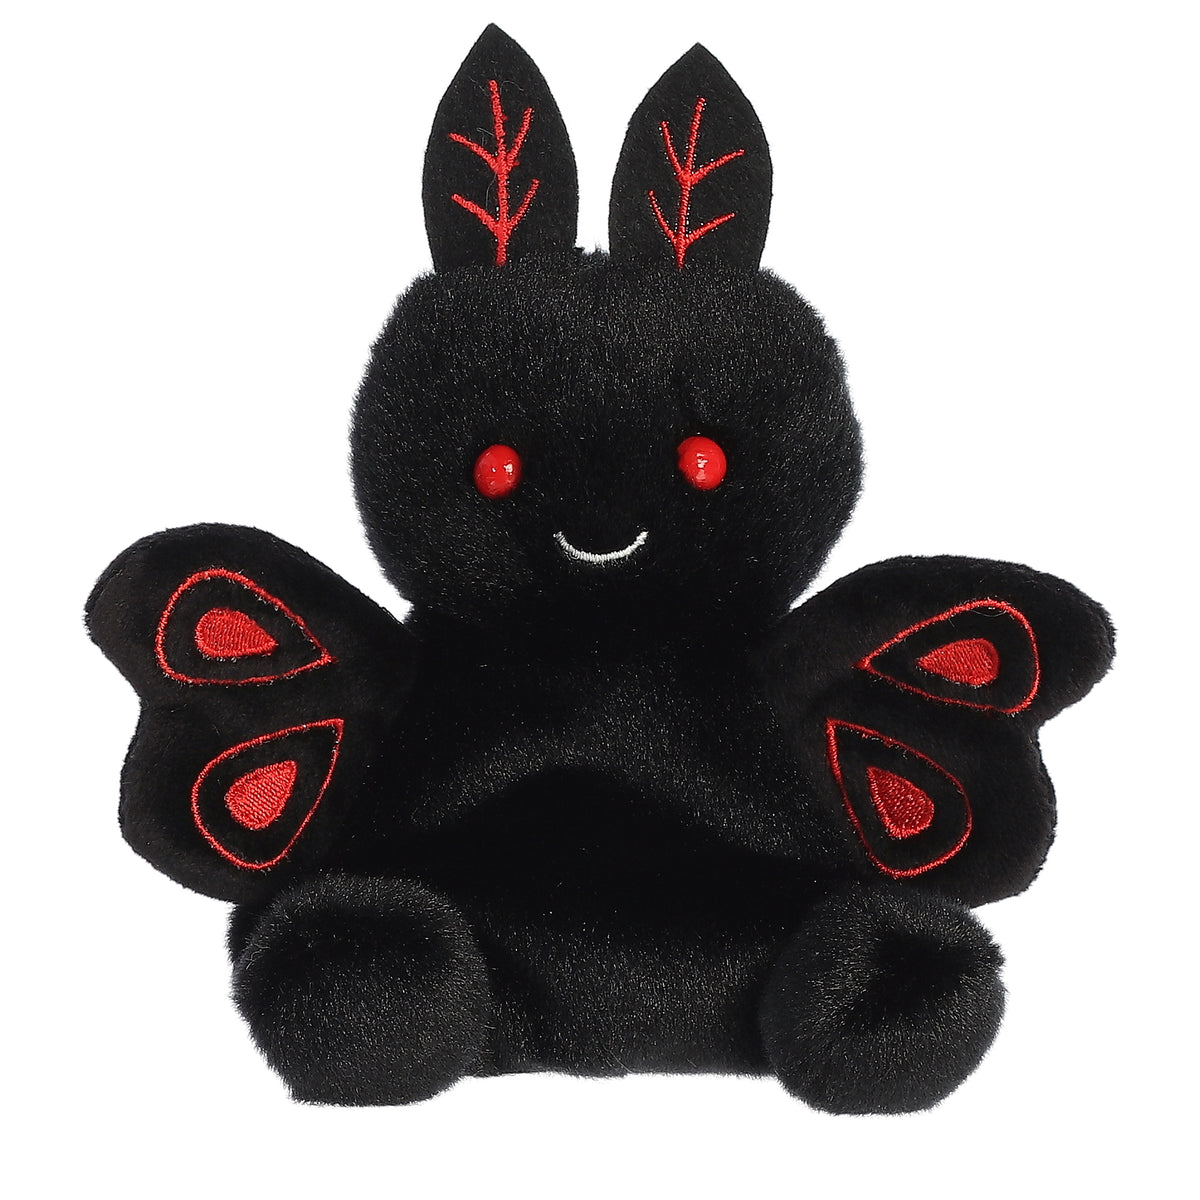 Mortimer Mothman plush from Palm Pals, with black fur and red highlights, and beautiful red and black moth plush wings